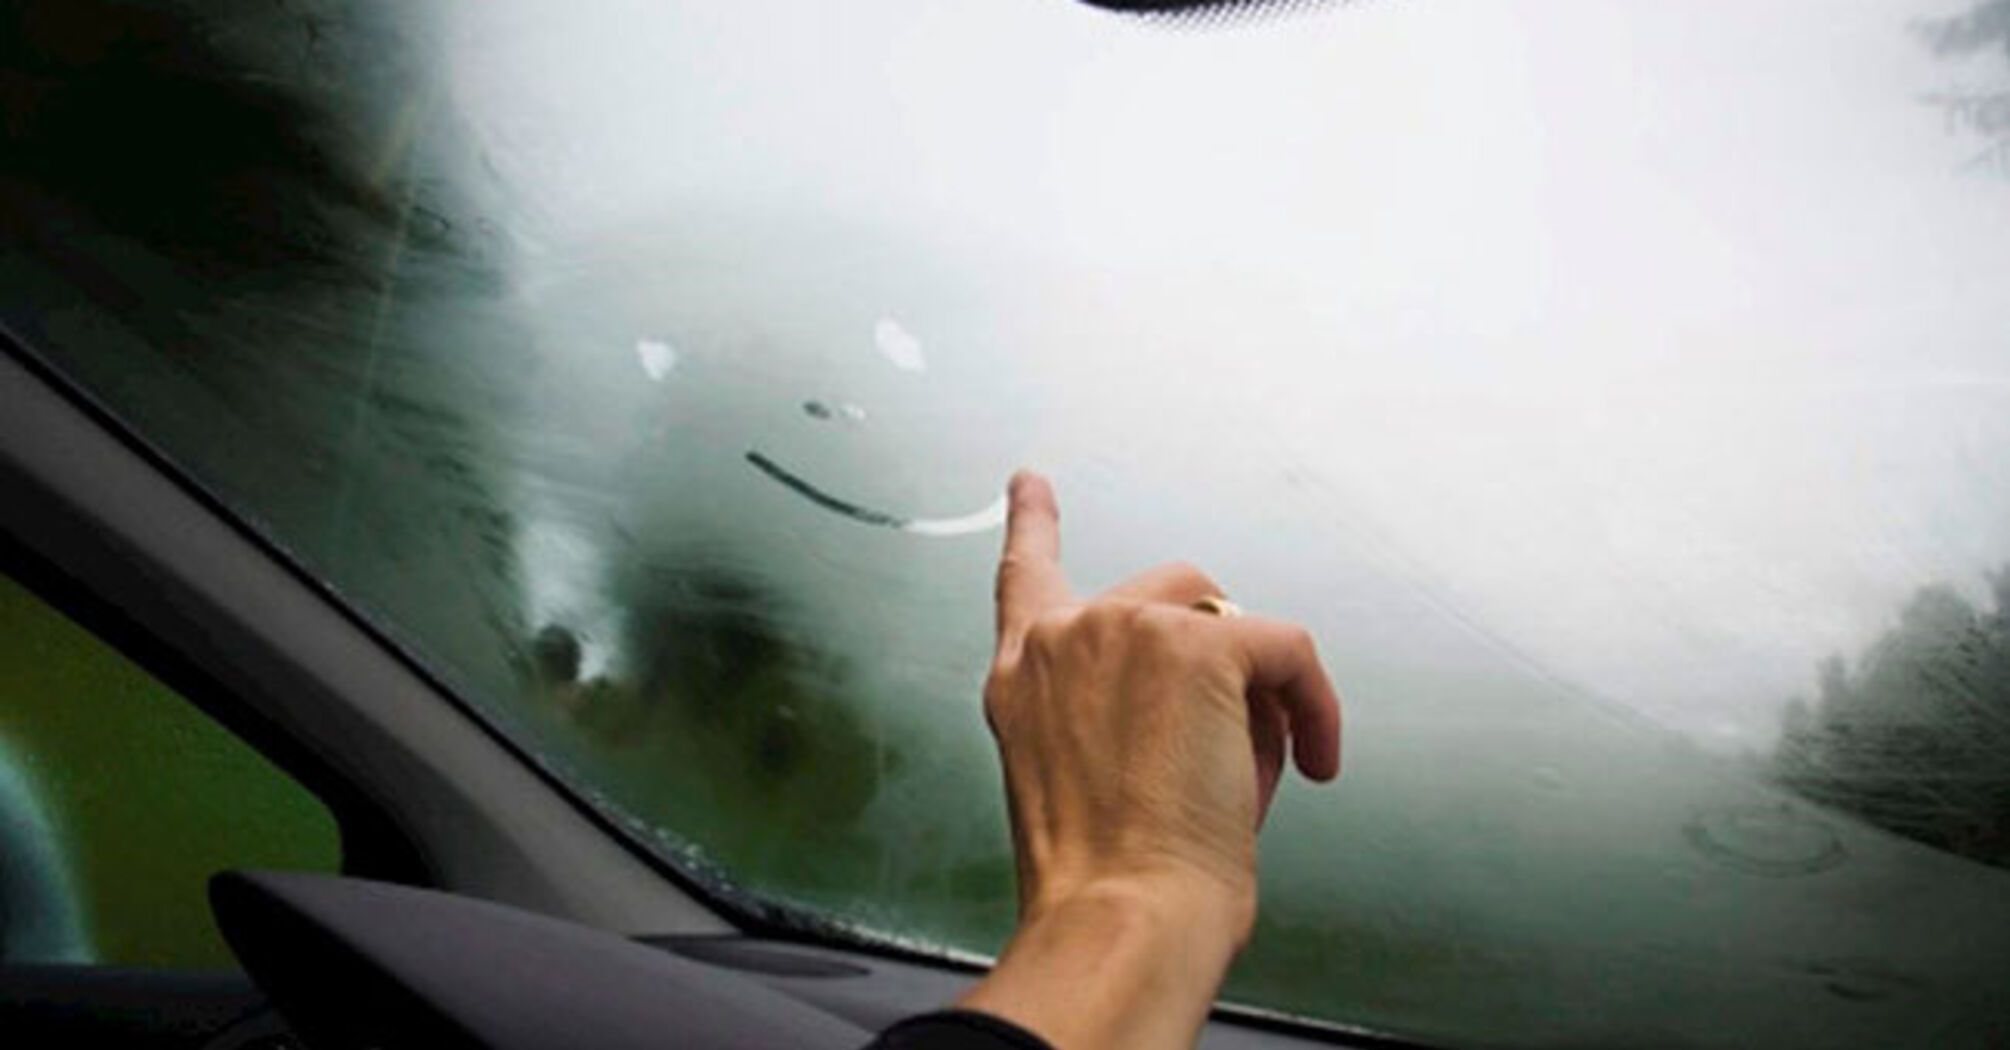 How to prevent car windshield fogging